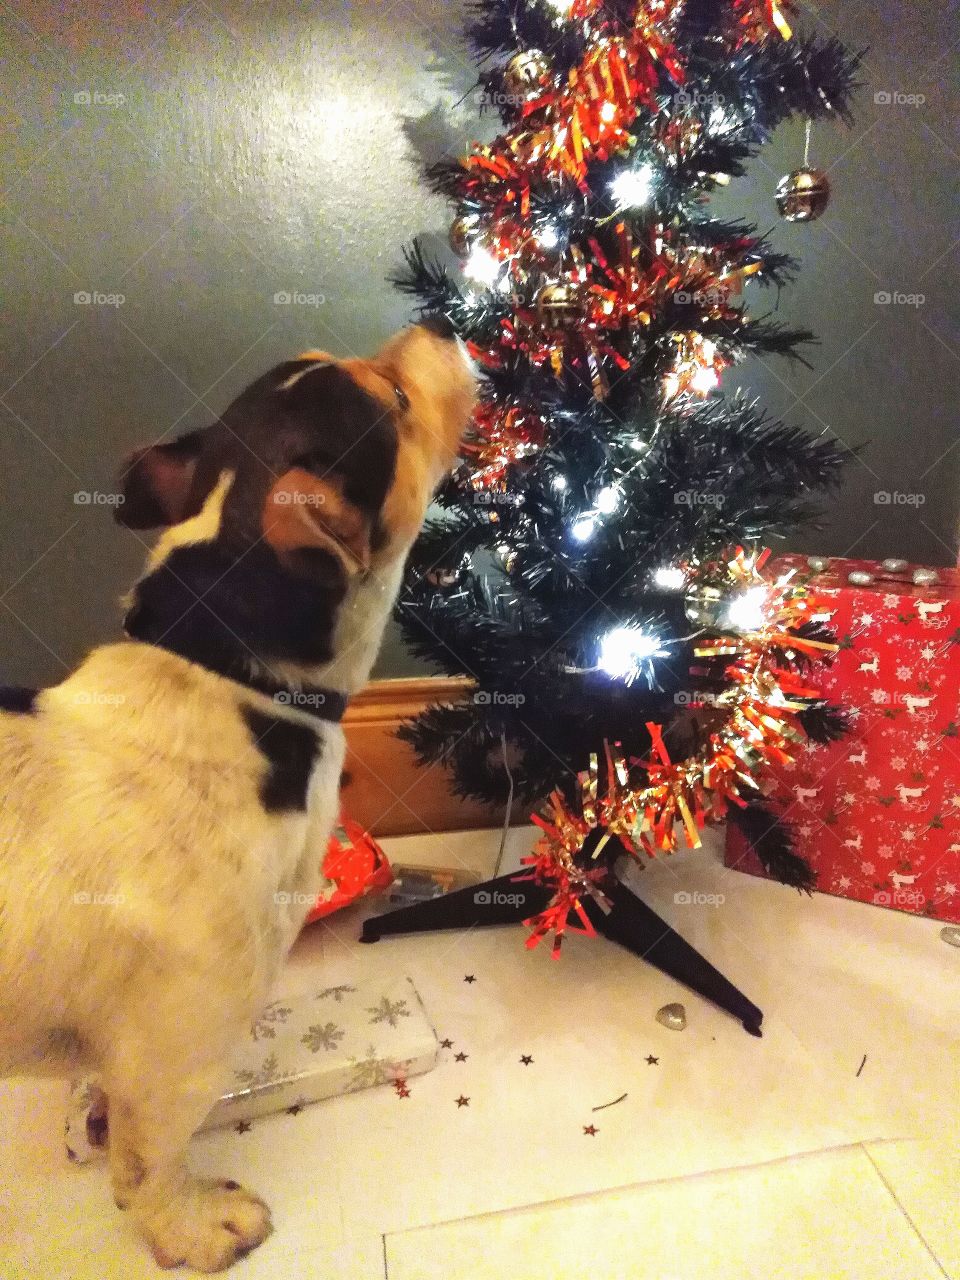 Puppy's First Christmas